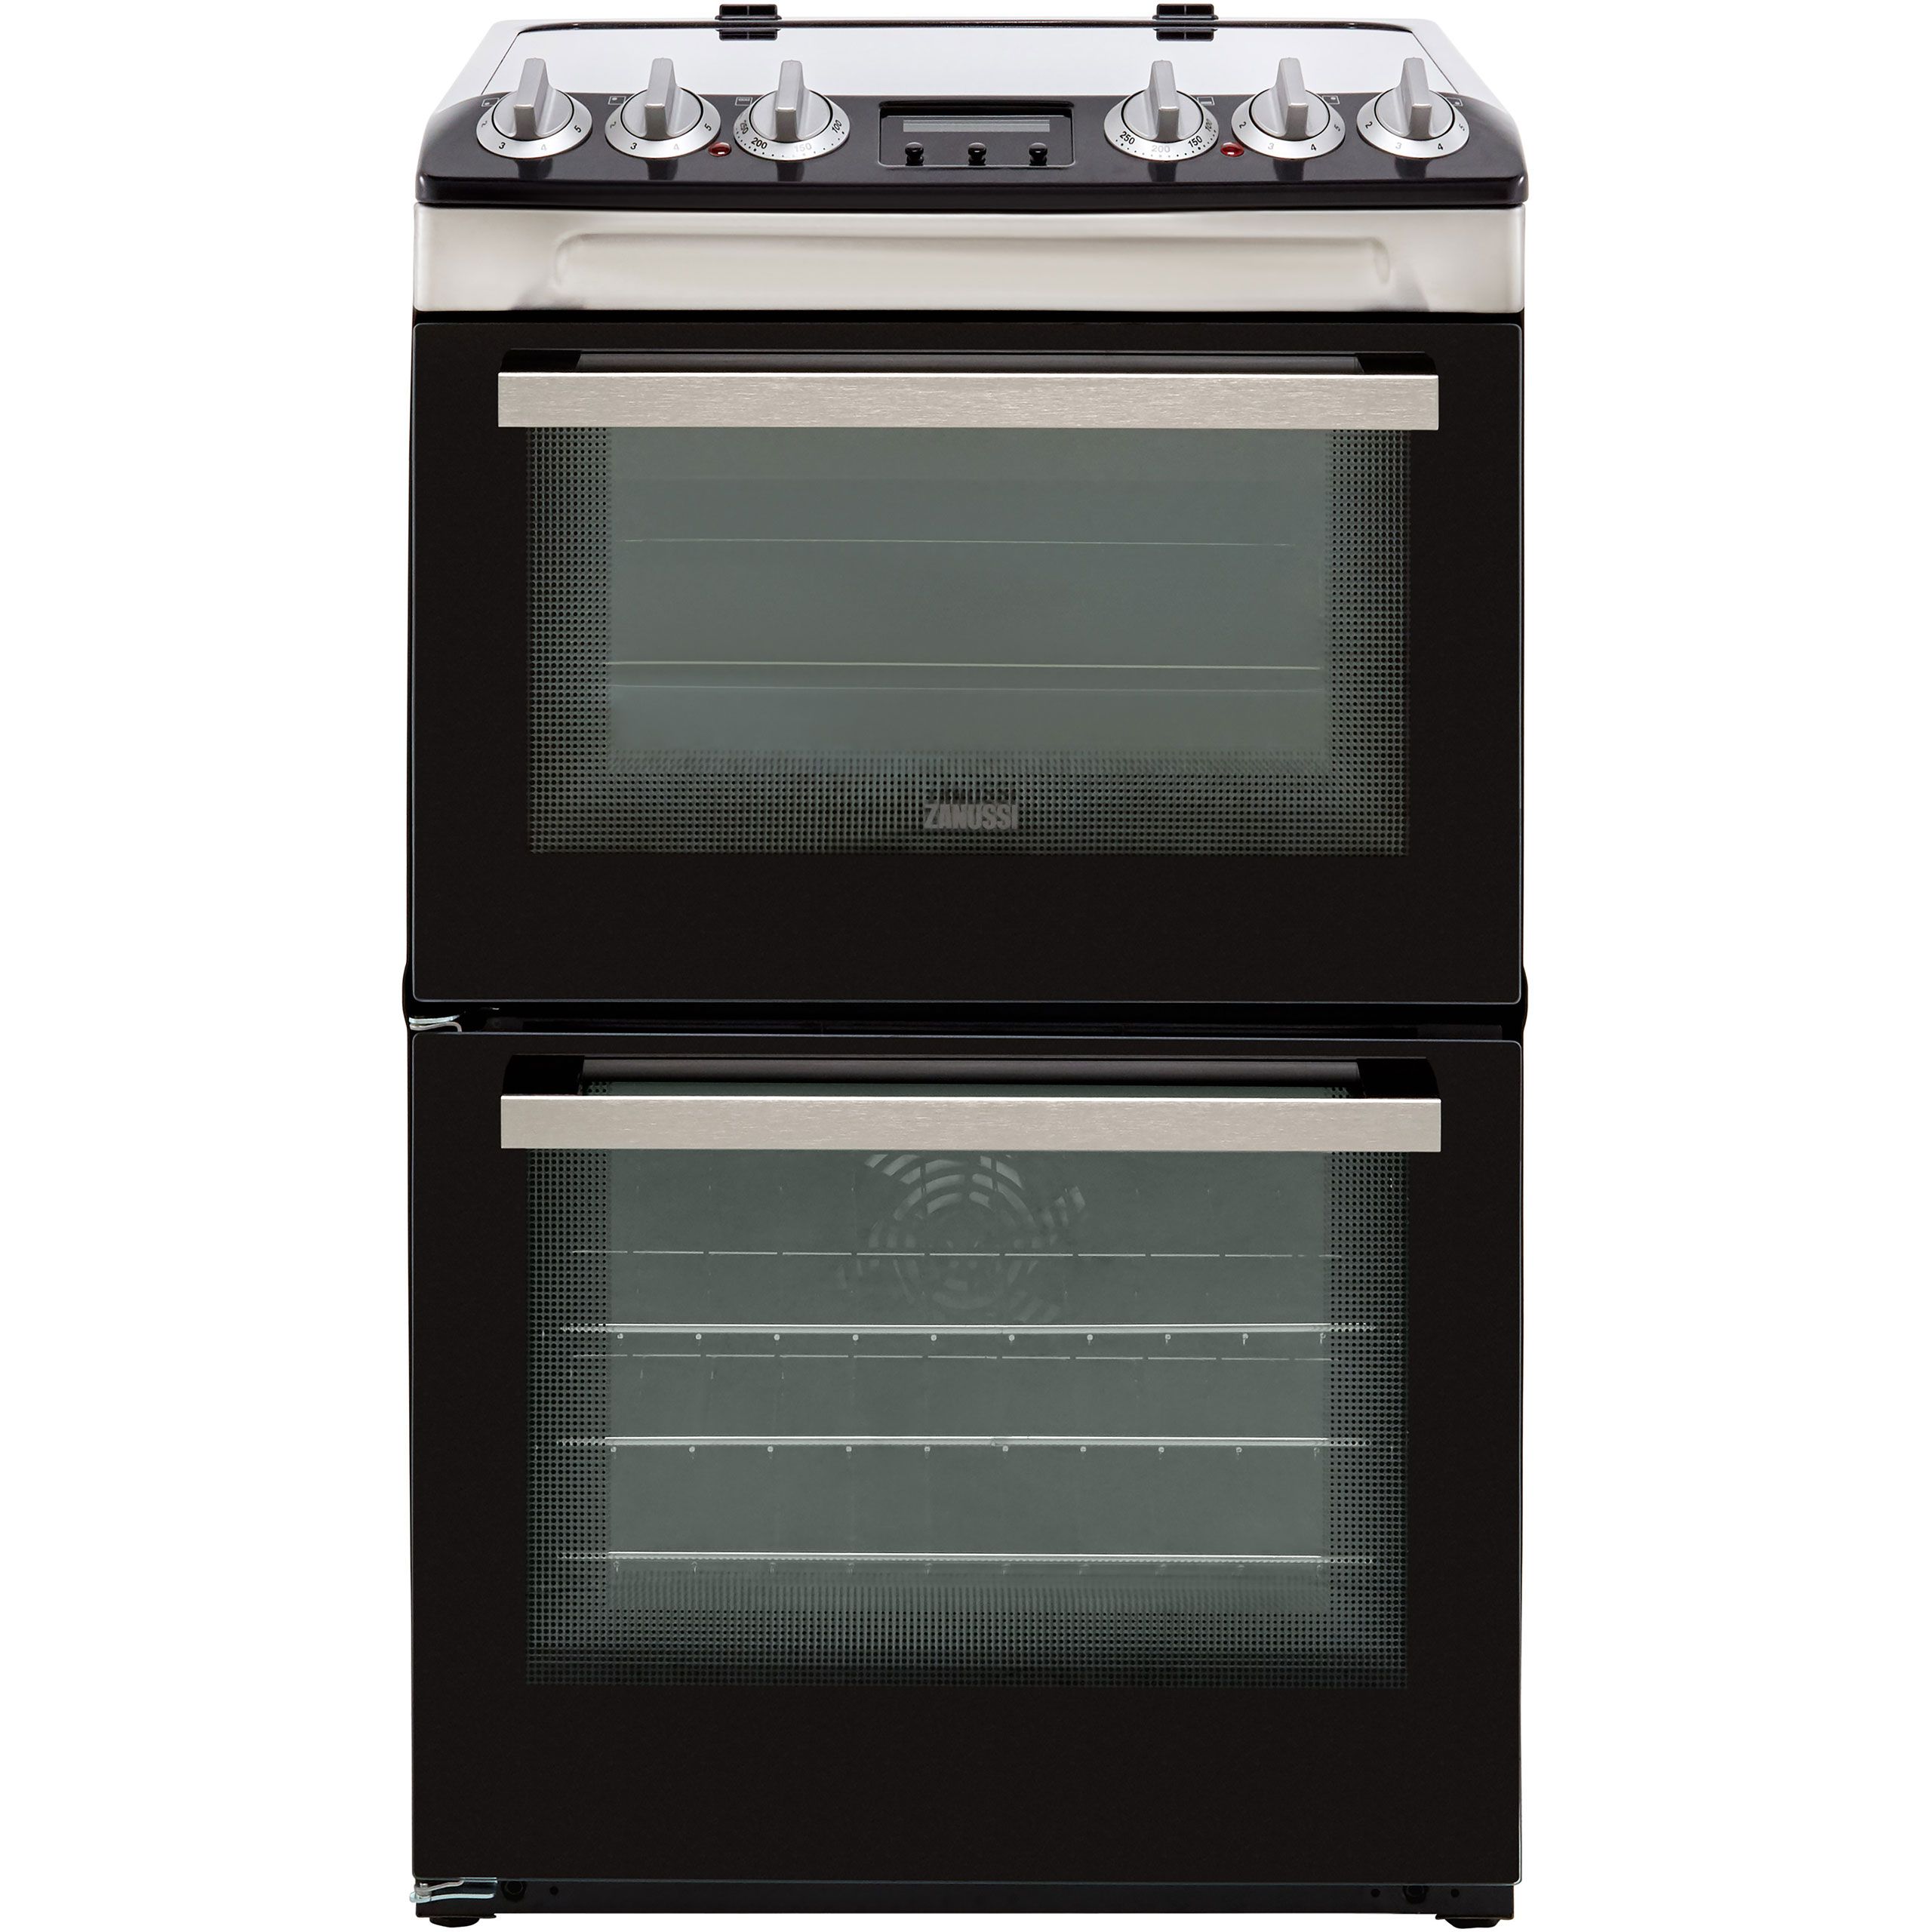 Zanussi ZCV46250XA 55cm Electric Cooker with Ceramic Hob - Stainless Steel - A/A Rated, Stainless Steel